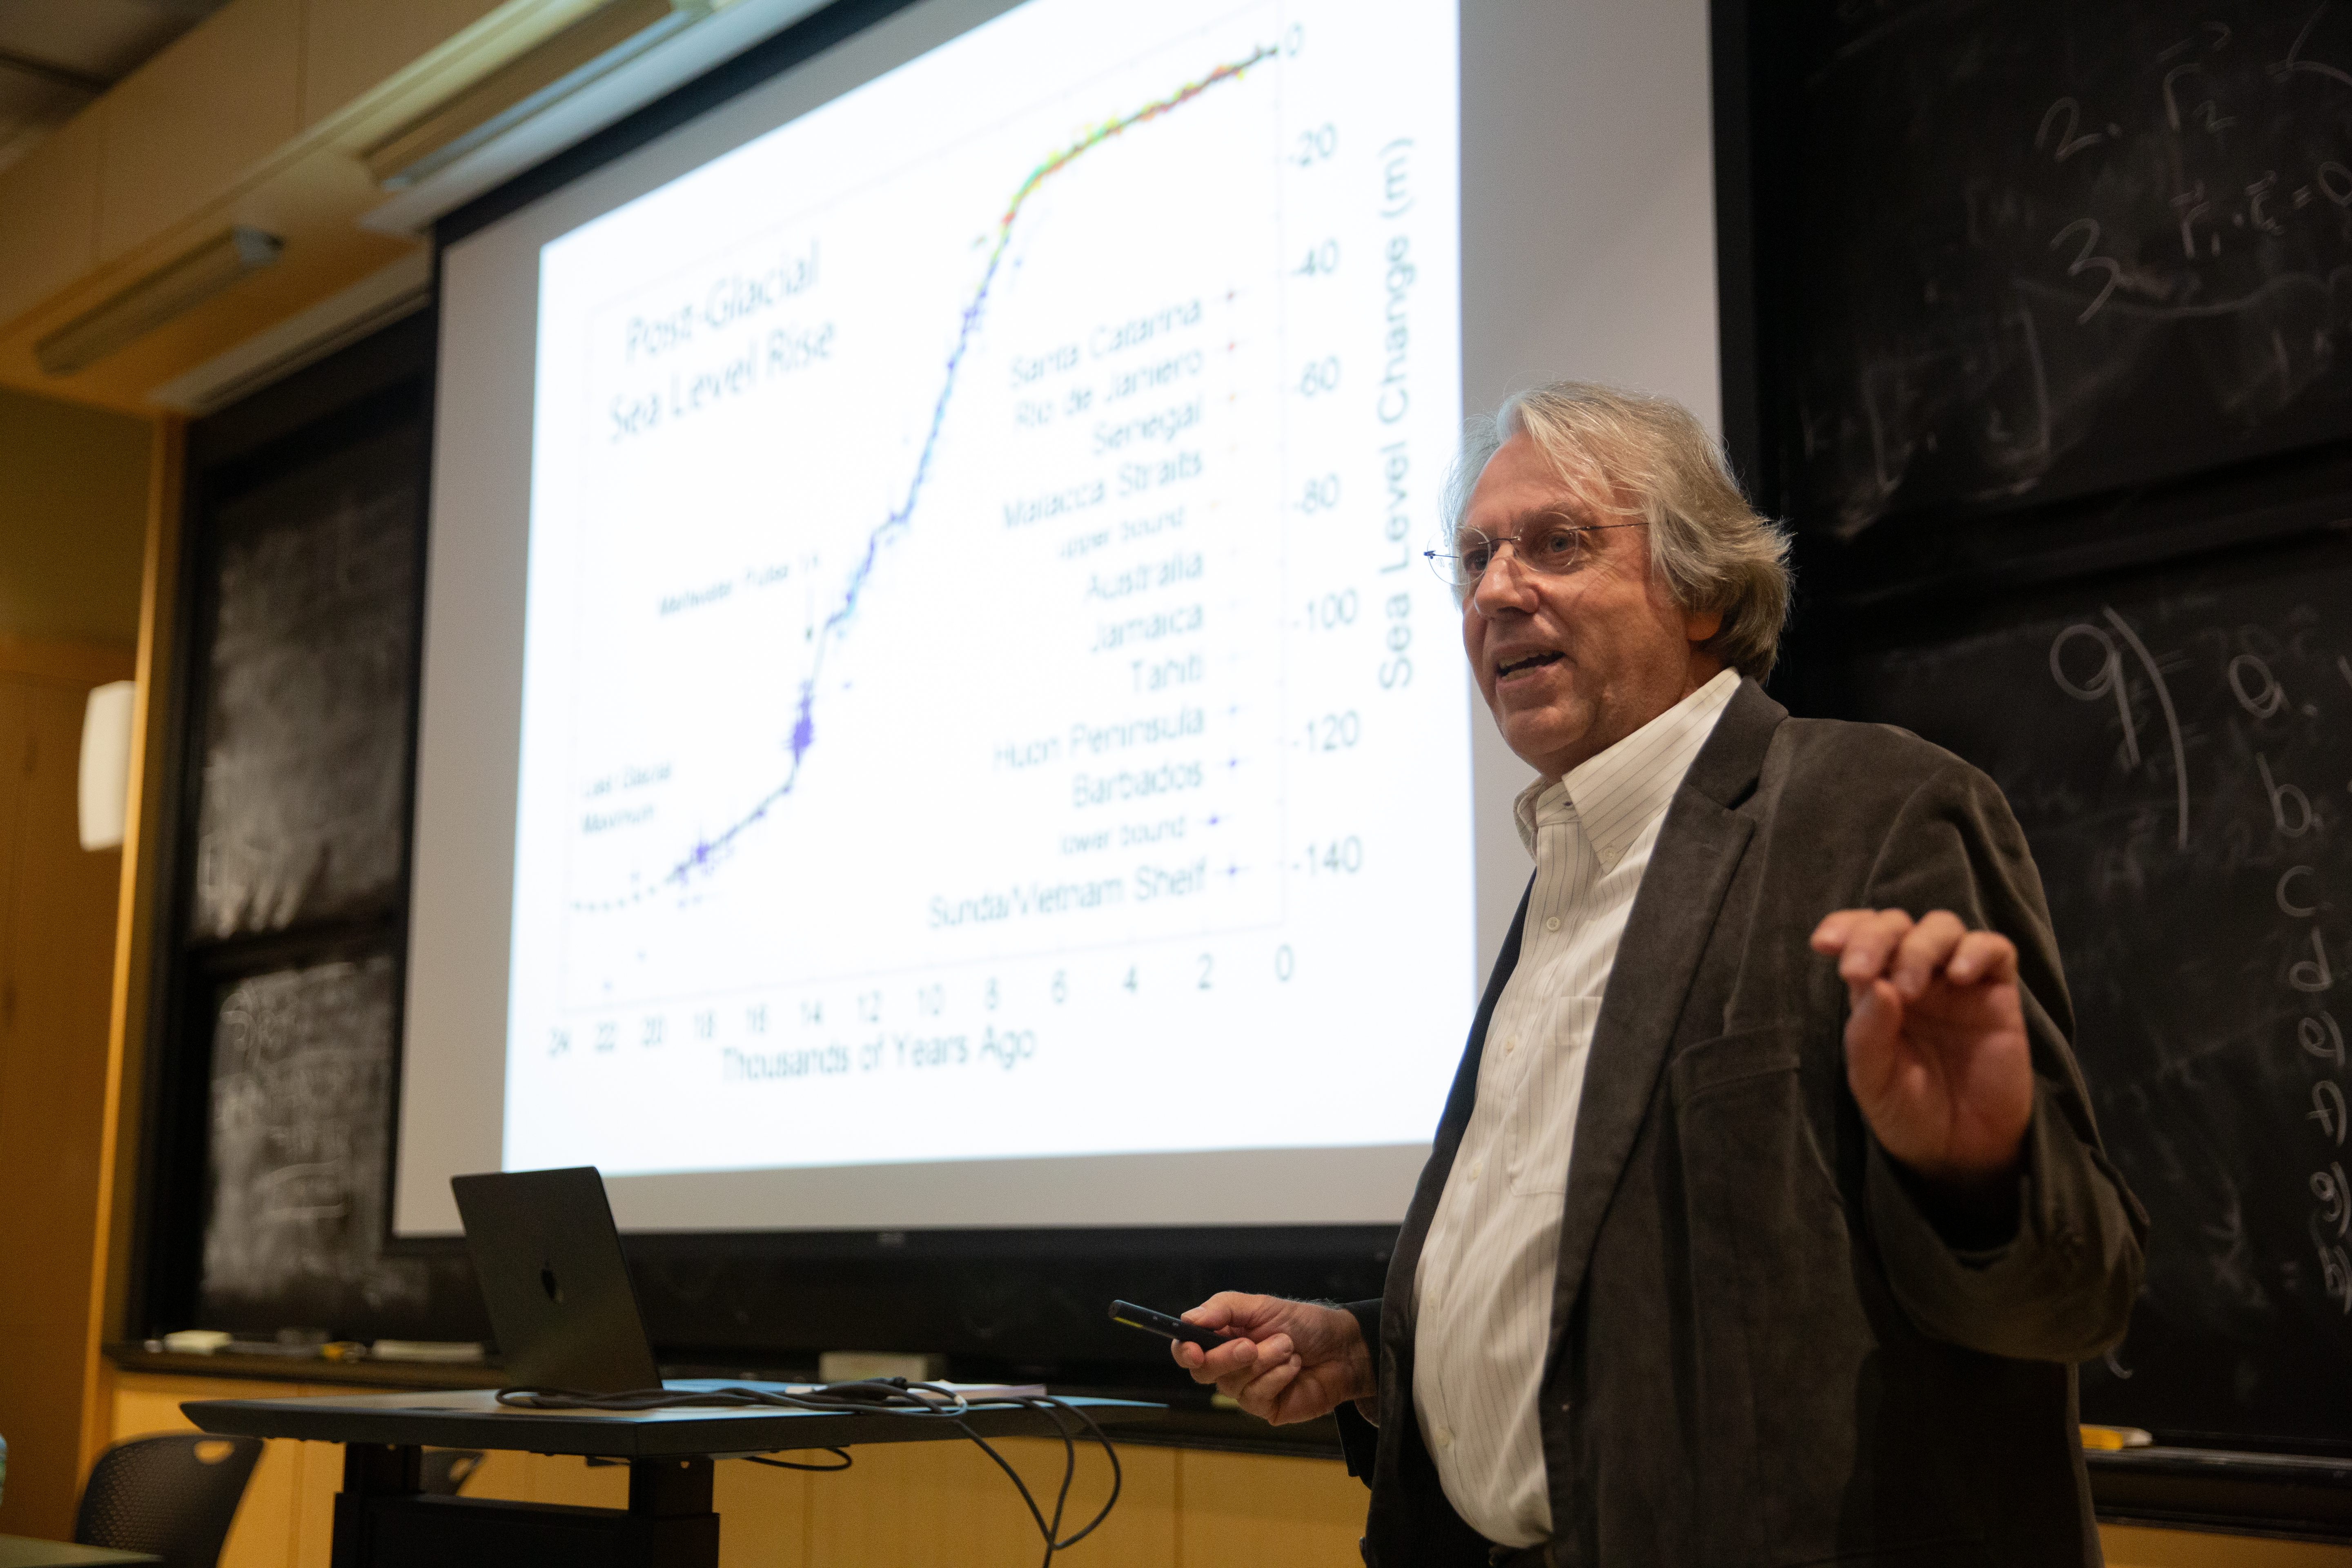 Kerry Emanuel discusses sea level rise during a conversation on climate change. The screen behind him features an image plotting the course of sea level rise over millennia.